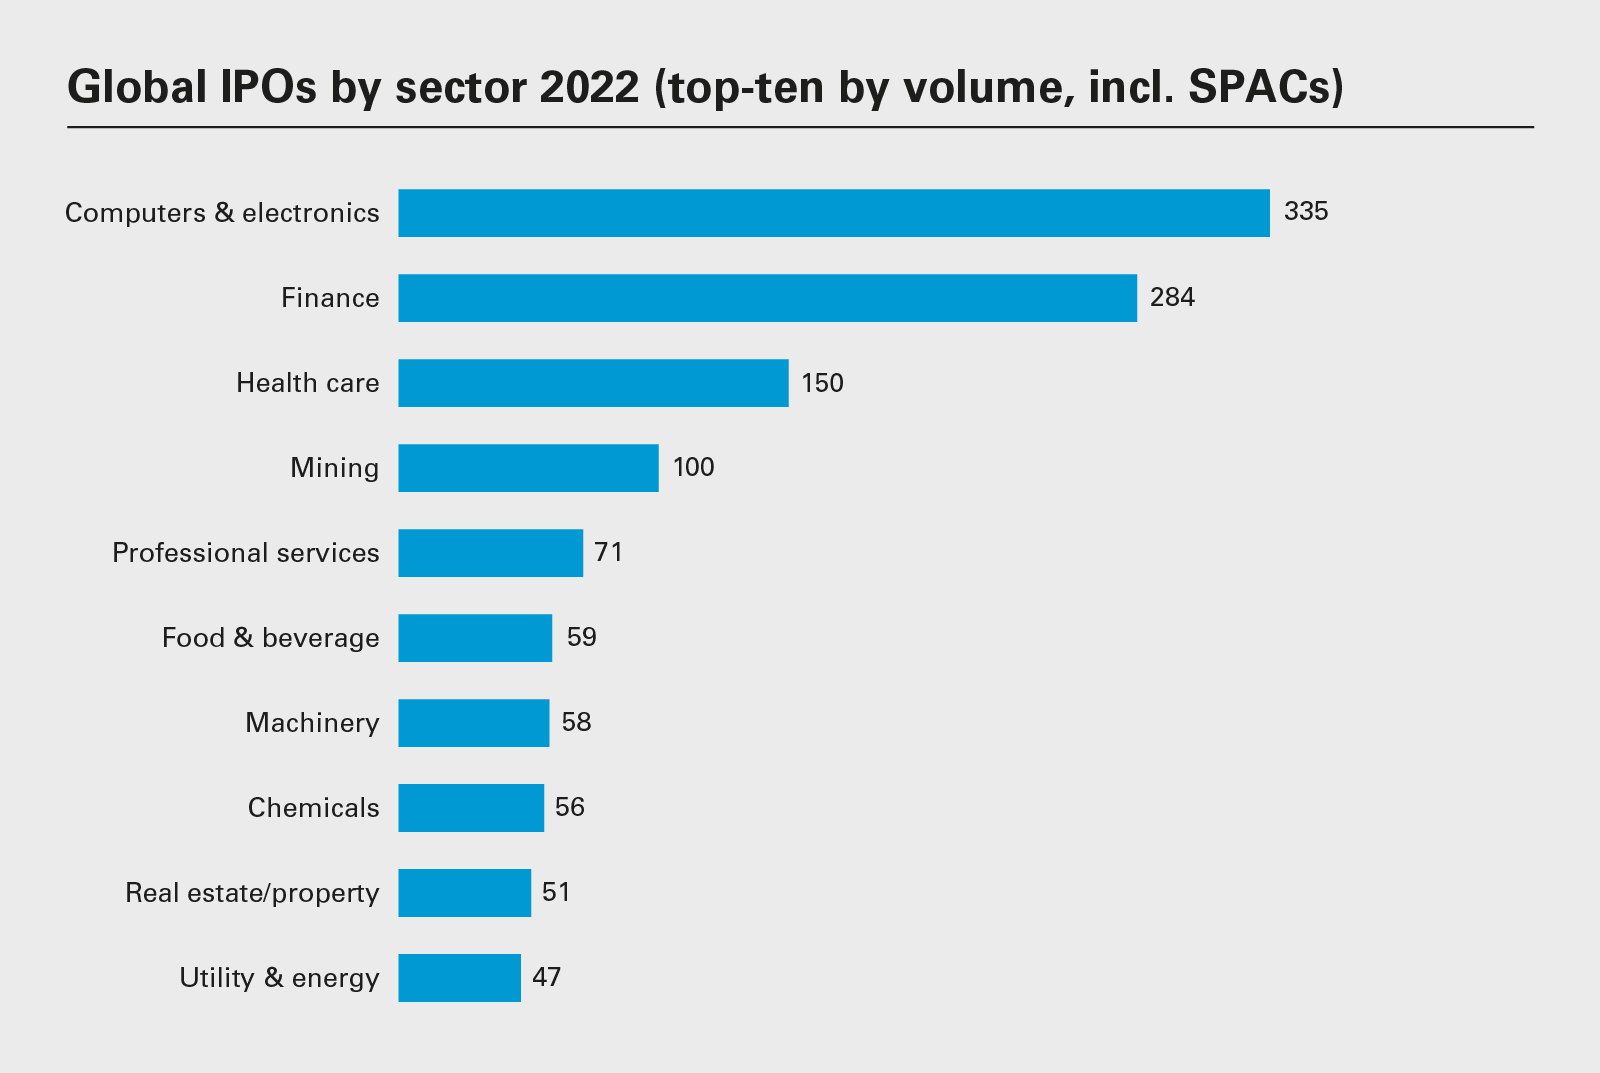 Global IPOs by sector 2022 (top-ten by volume, incl. SPACs)